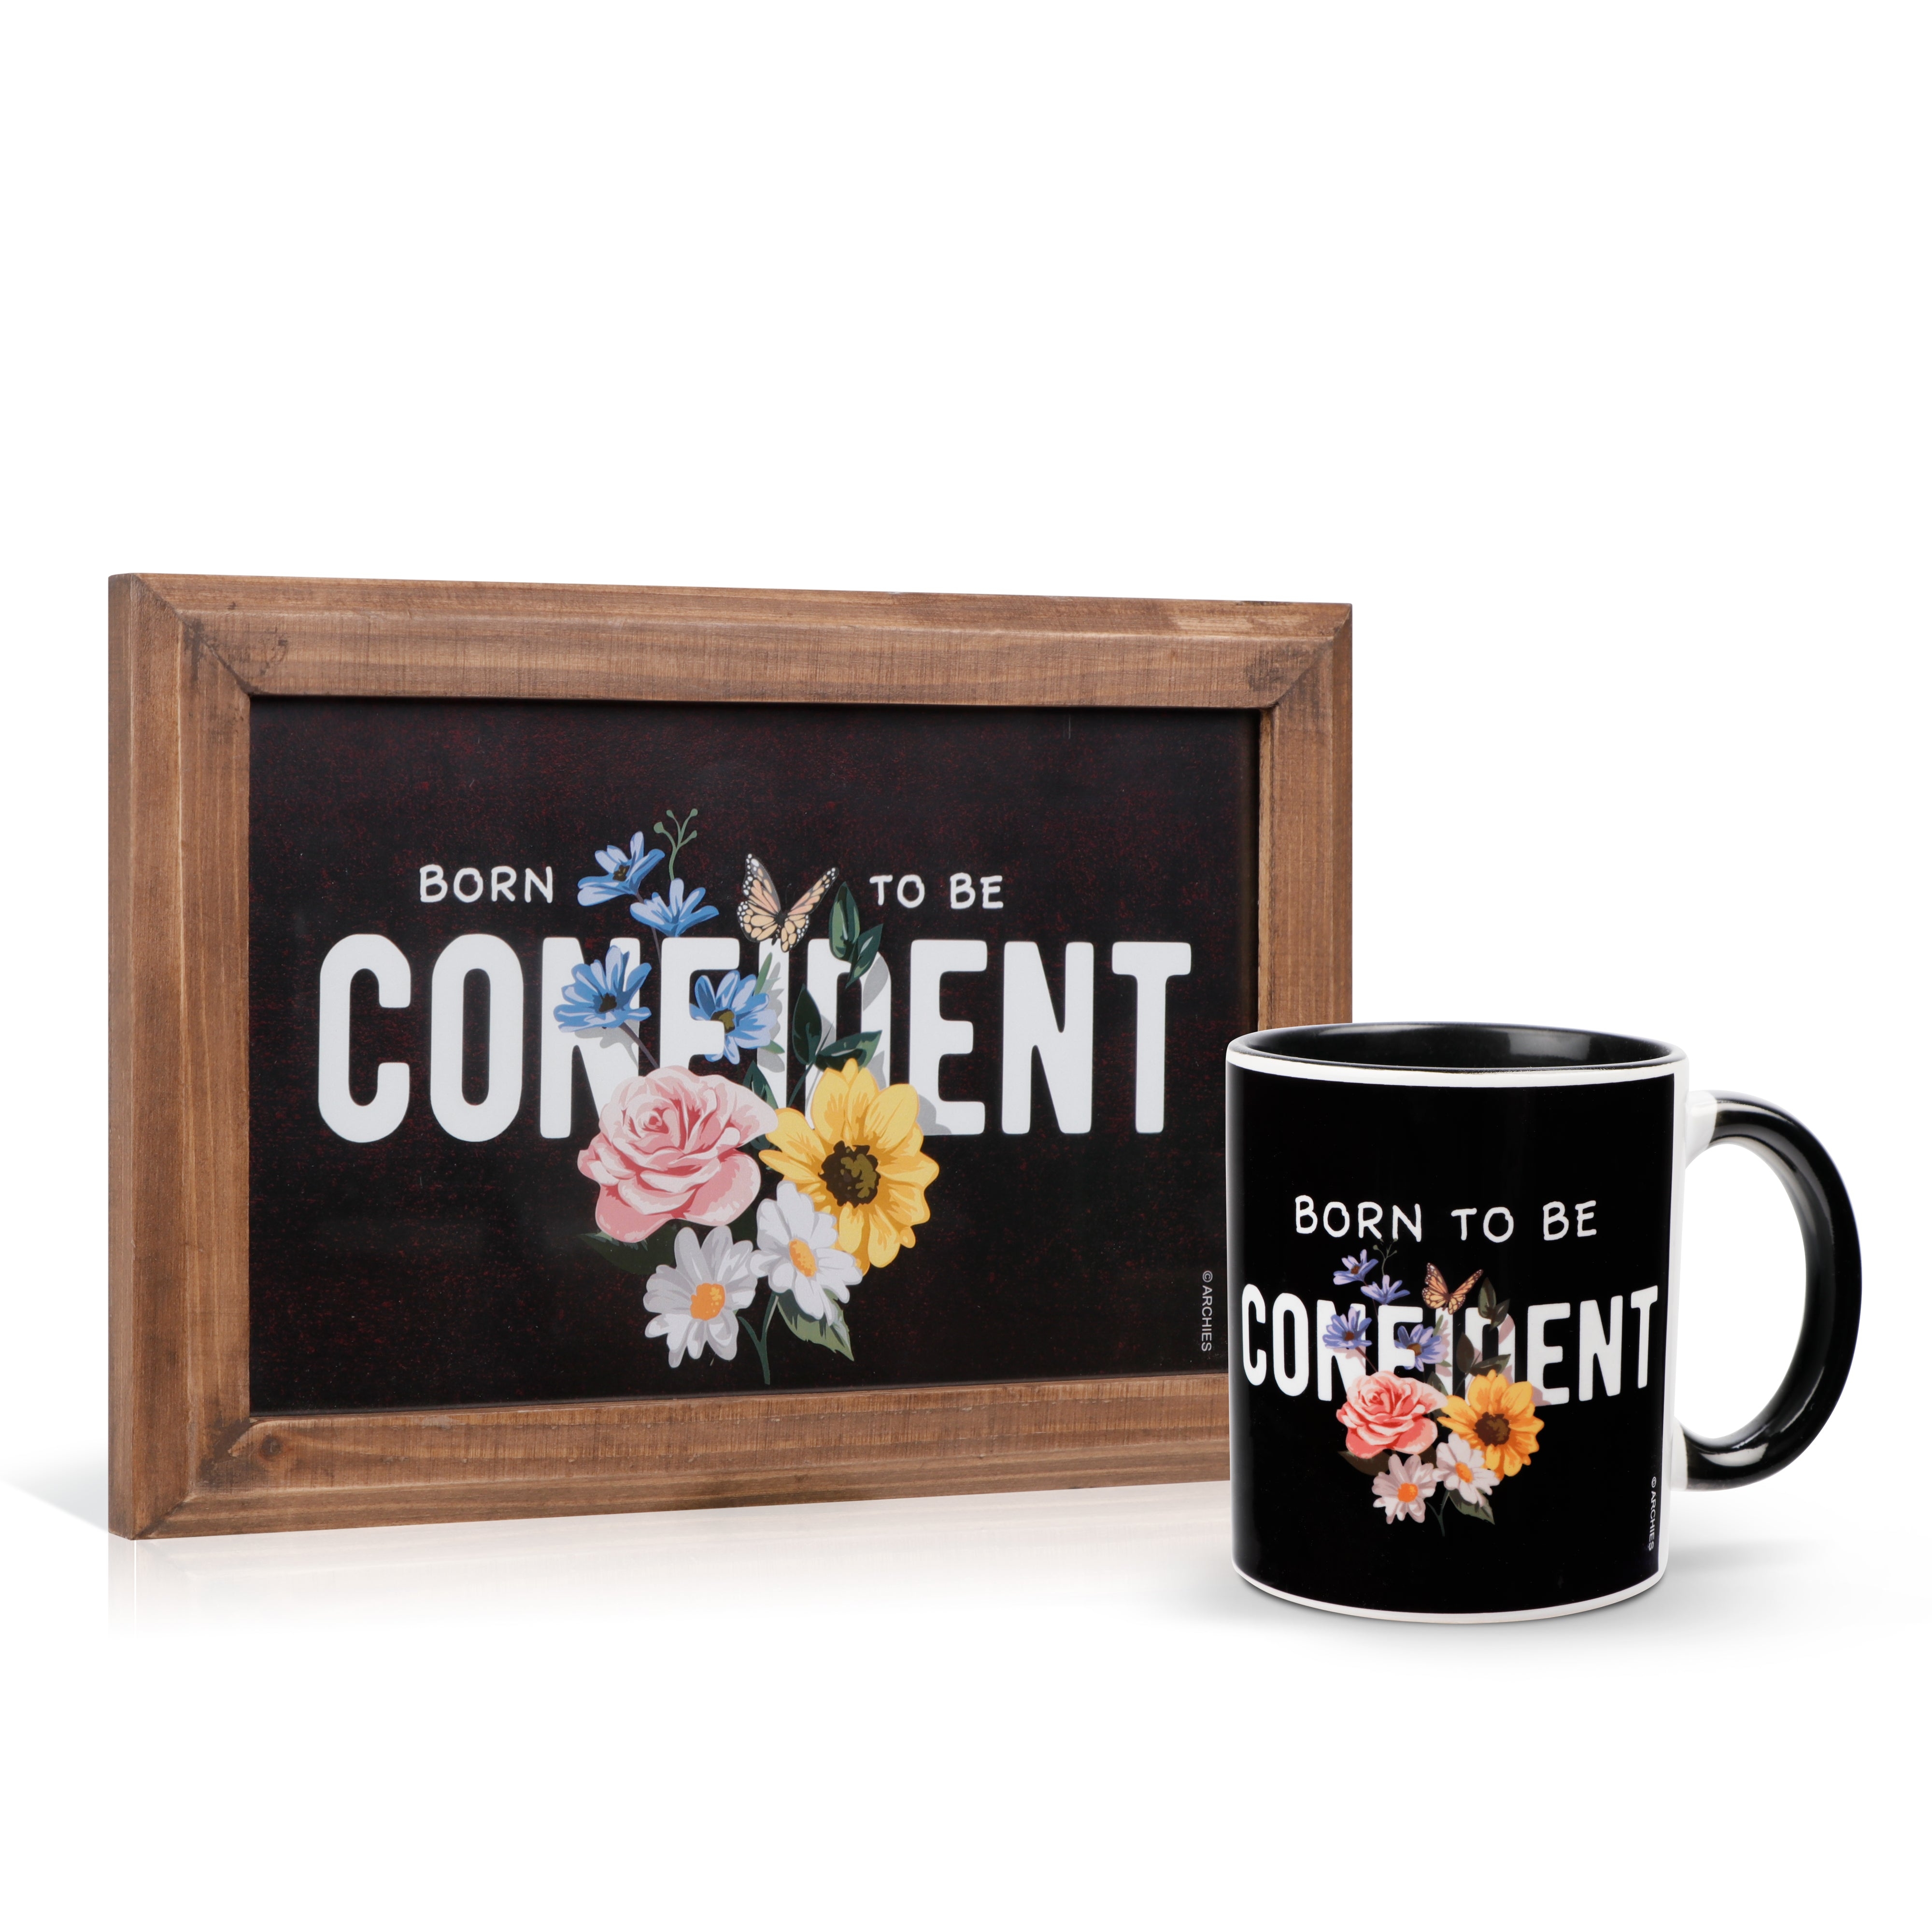 Archies | Archies KEEP SAKE Combo Gift with Ceramic Mug and Elevated Initial Quotatio- Born to be CONFIDENT